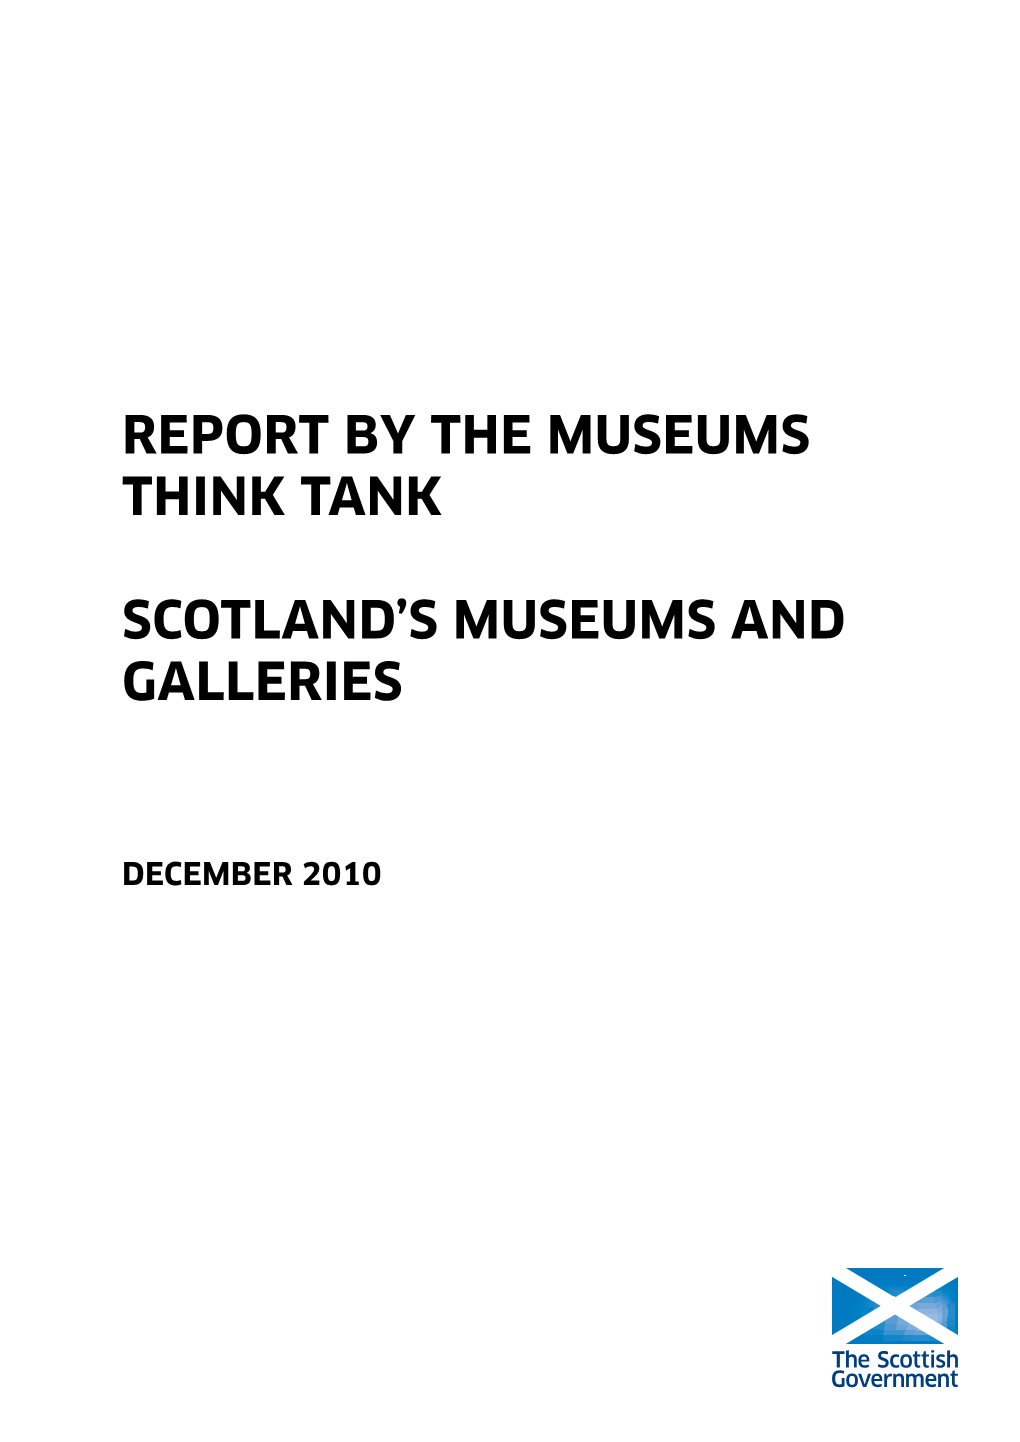 Scotland's Museums and Galleries